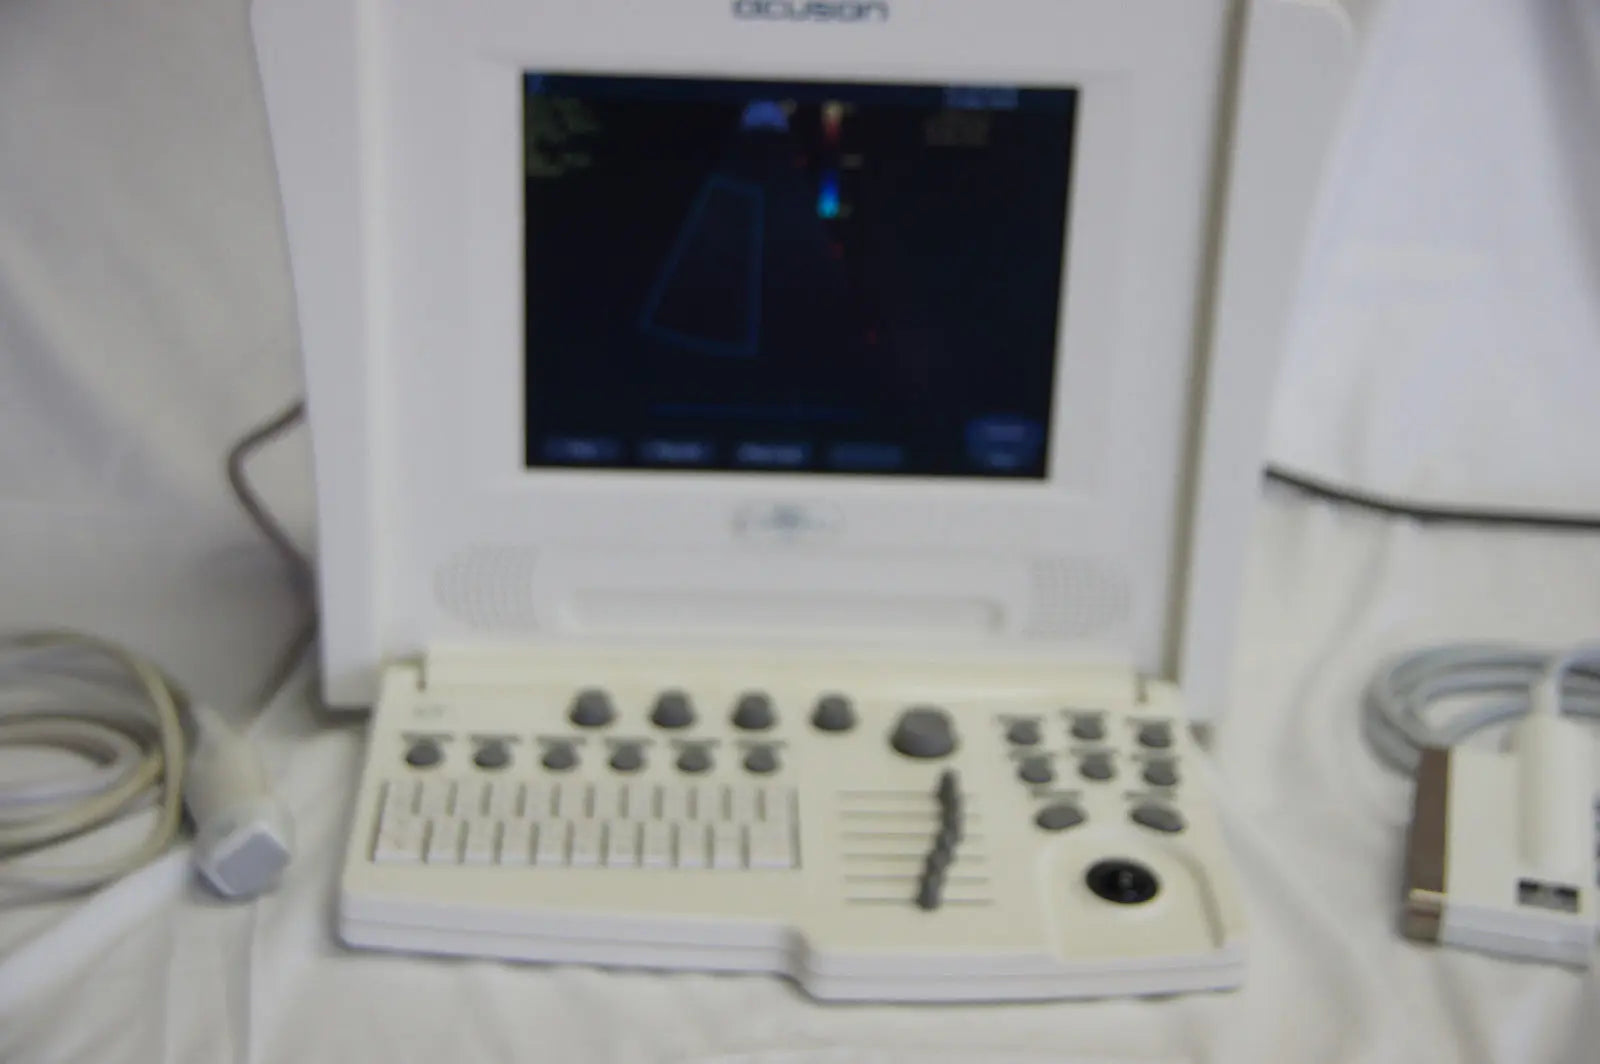 Acuson Cypress Ultrasound System DIAGNOSTIC ULTRASOUND MACHINES FOR SALE